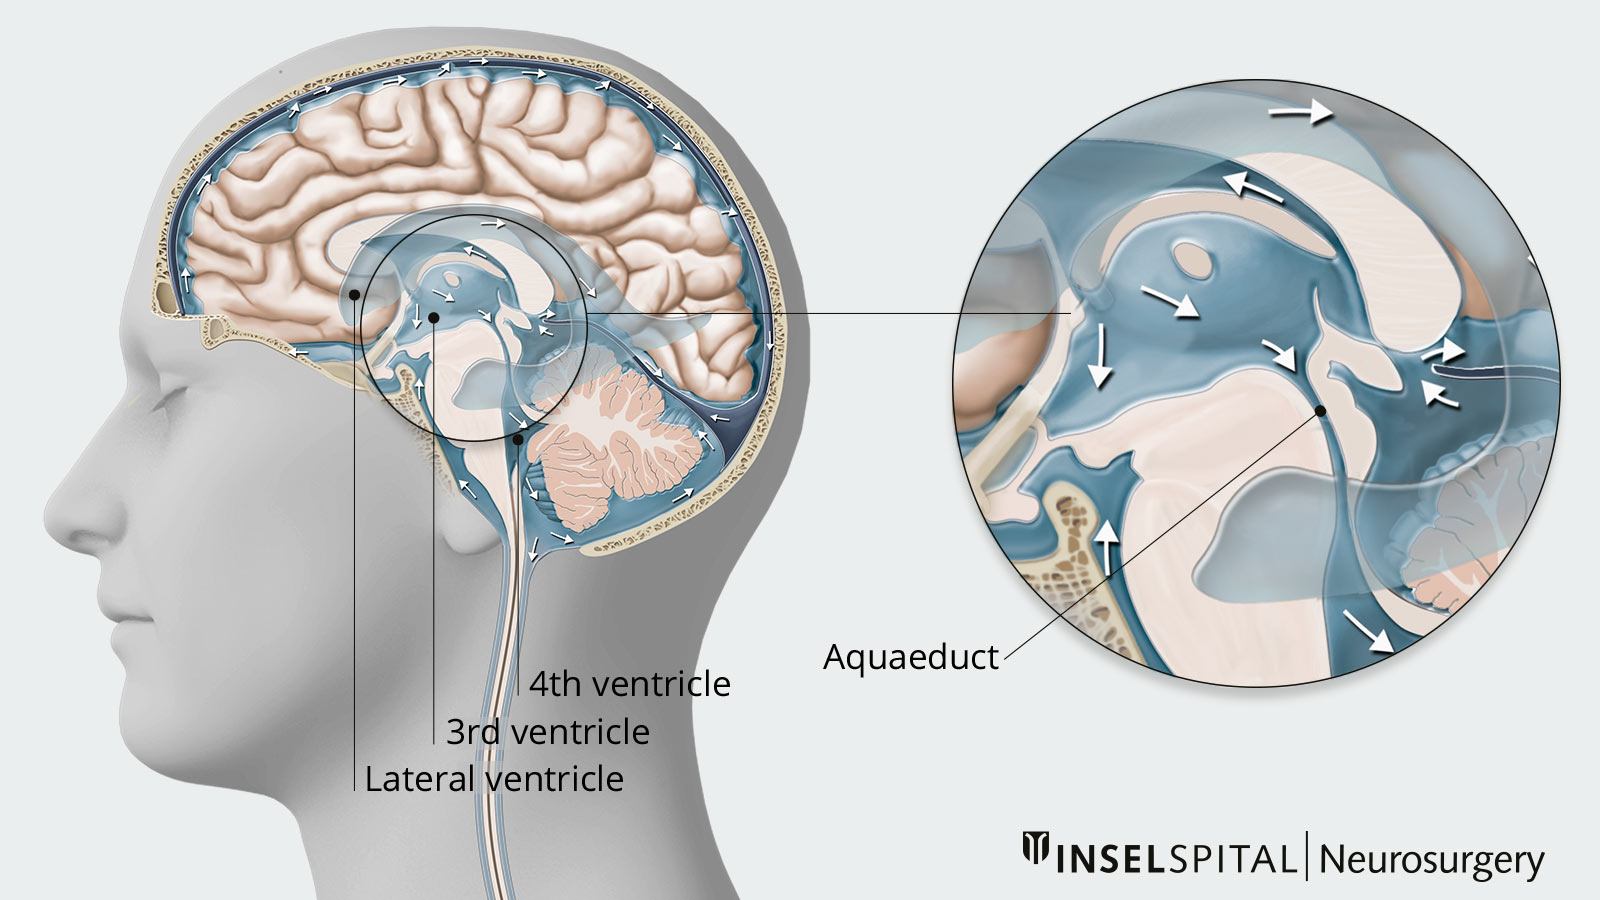 Drawing of the cerebral ventricles and the aqueduct between the 3rd and 4th cerebral ventricles